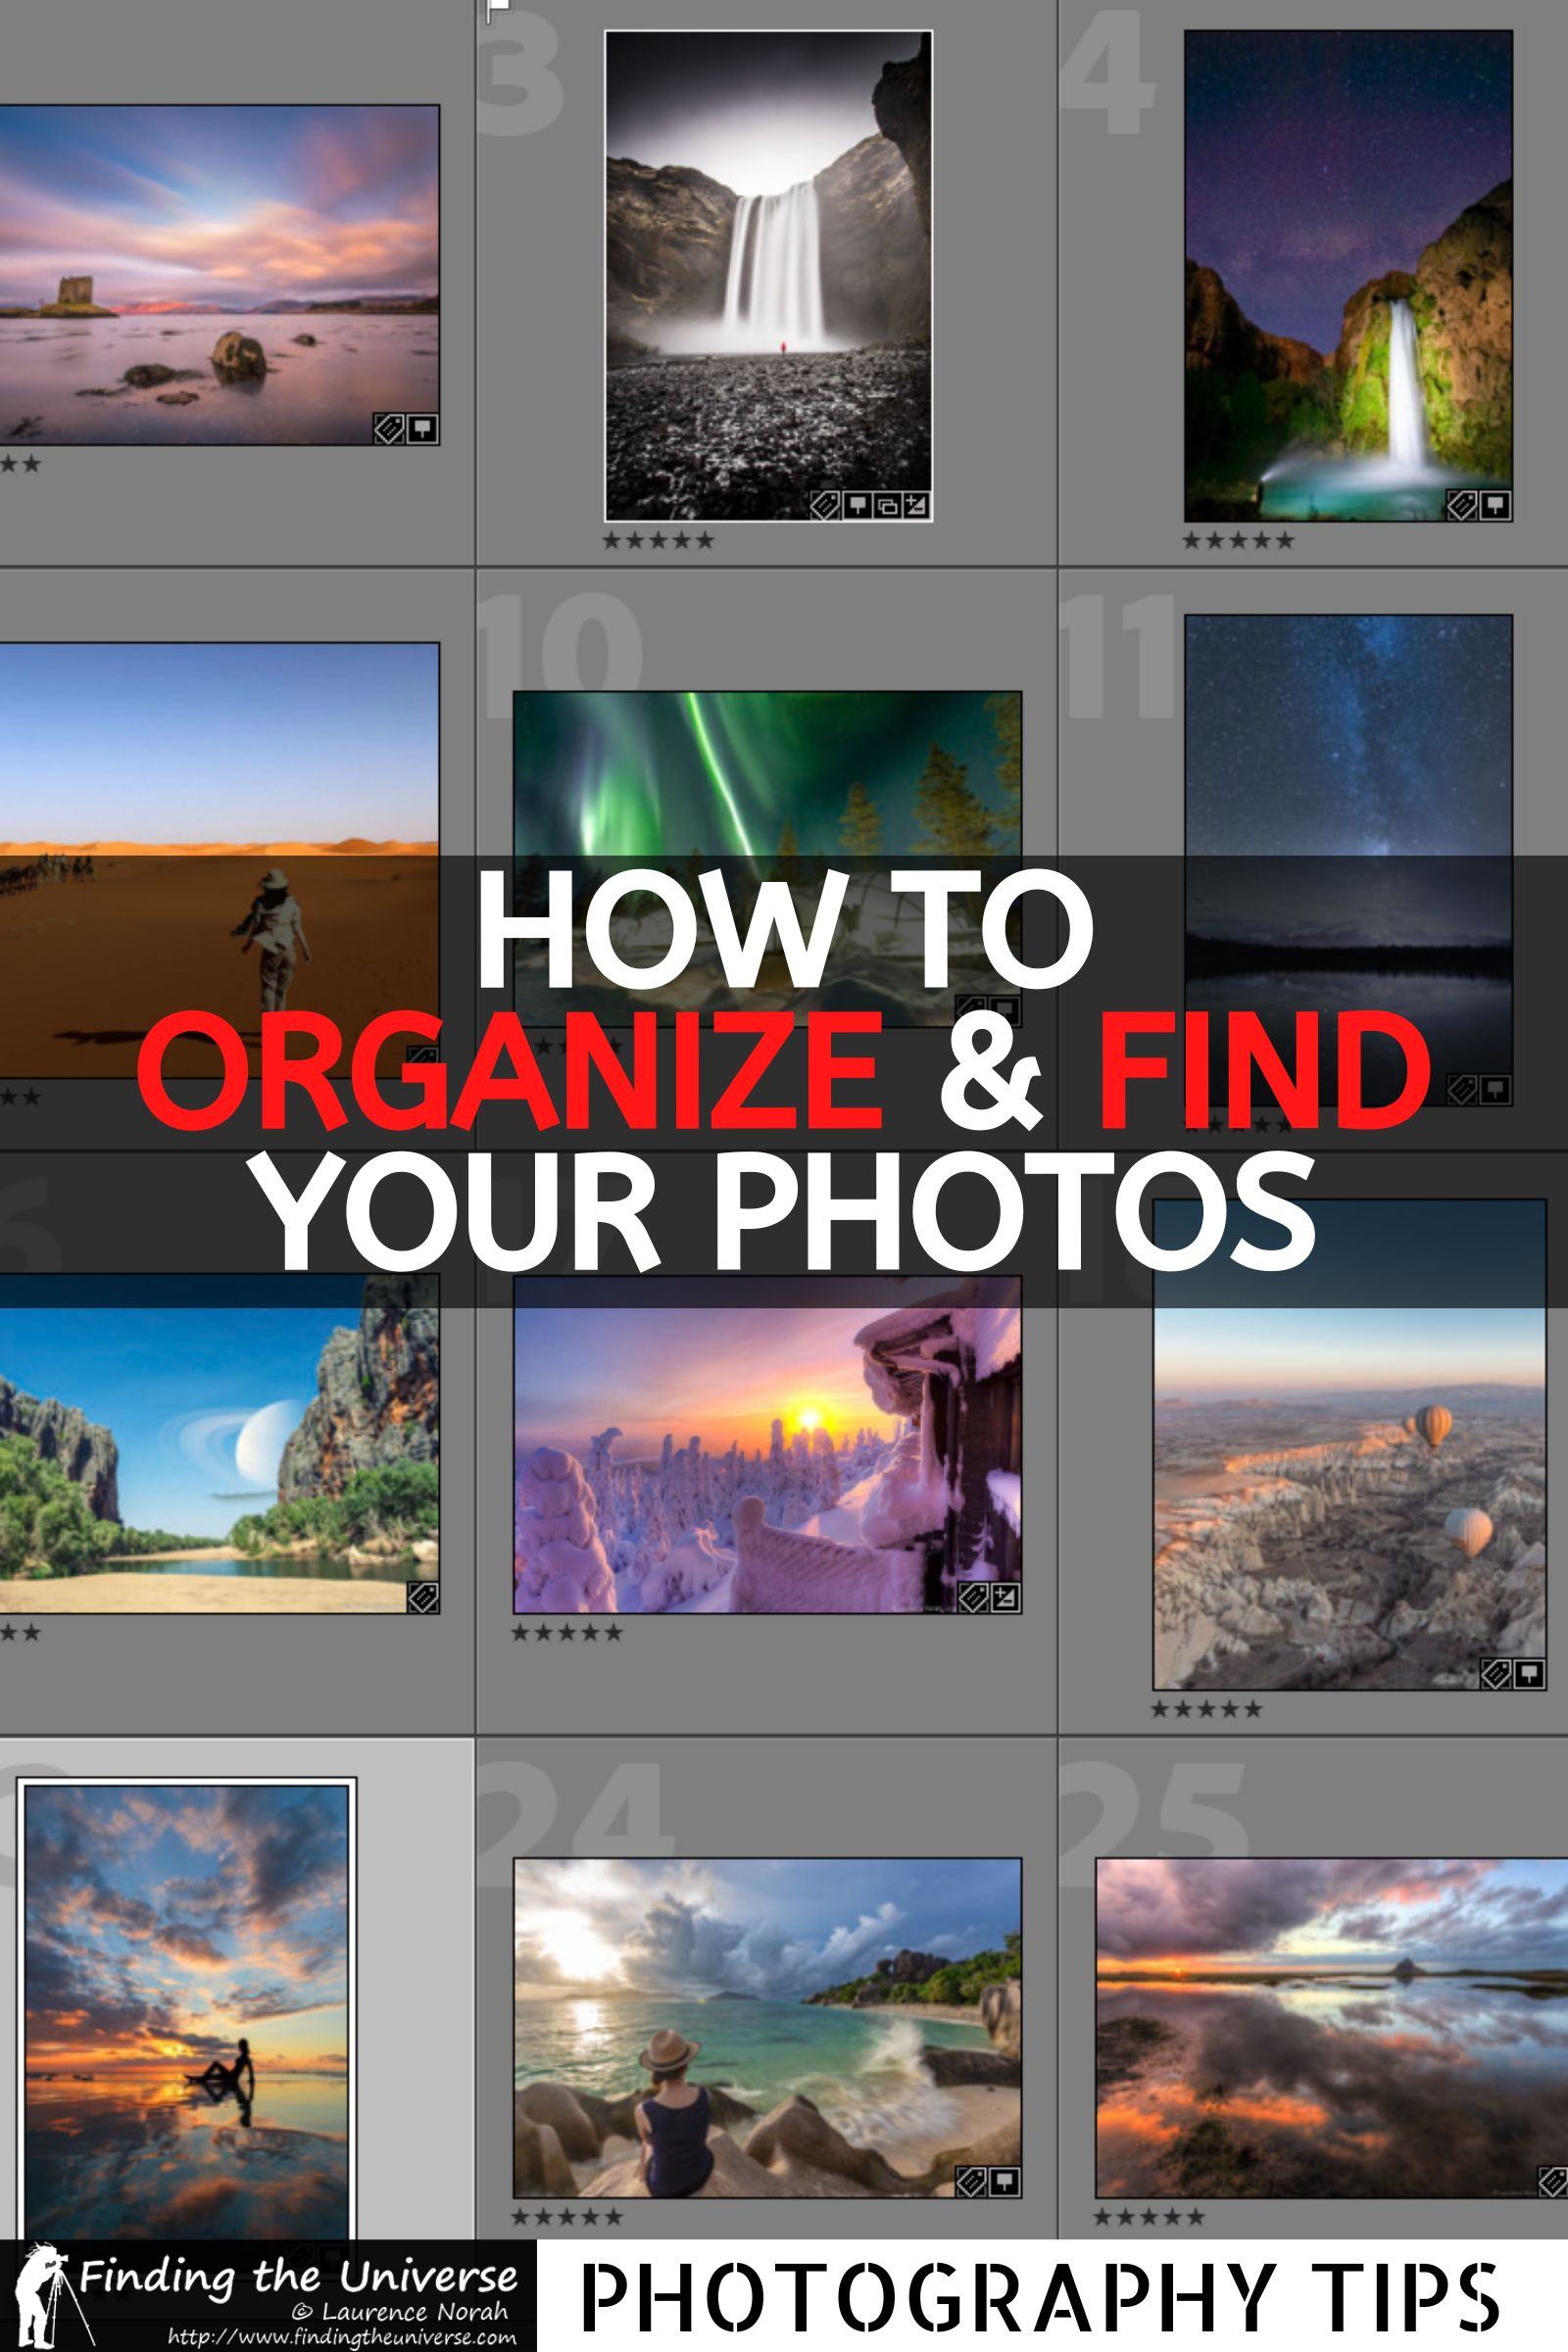 A detailed guide to digital photo organization, including how to easily search for and find the images you want from your photo library.